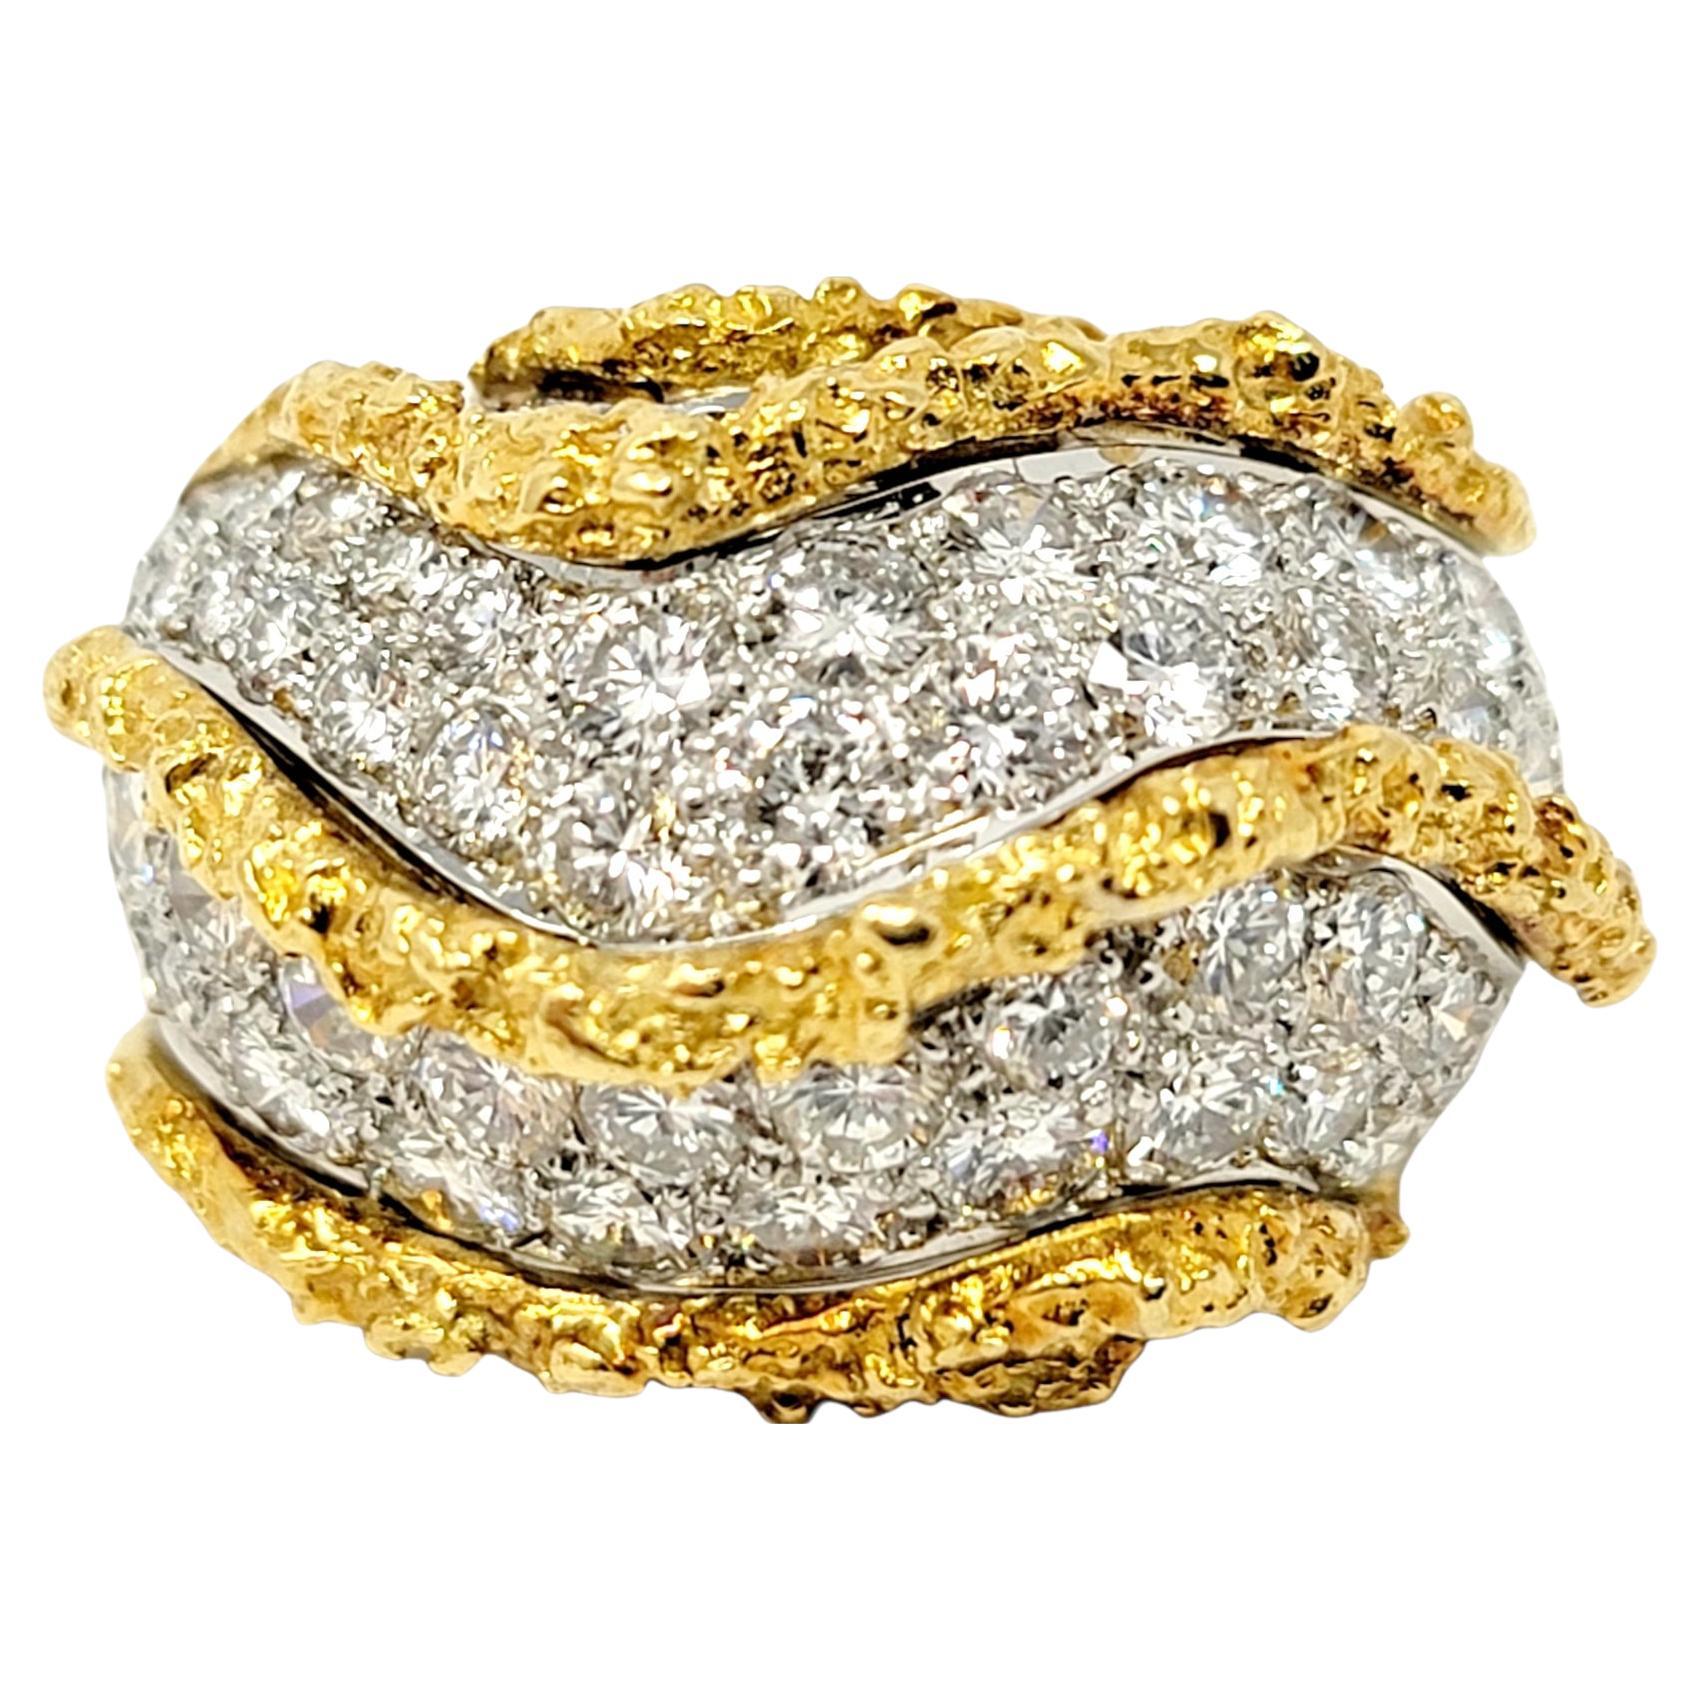 Ring size: 7

Bold and brilliant pave diamond gold river style dome ring will fill your finger with elegance. Substantial in both size and design, this heavy, detailed piece is absolutely exquisite. Textured 18 karat yellow gold ridges stretch